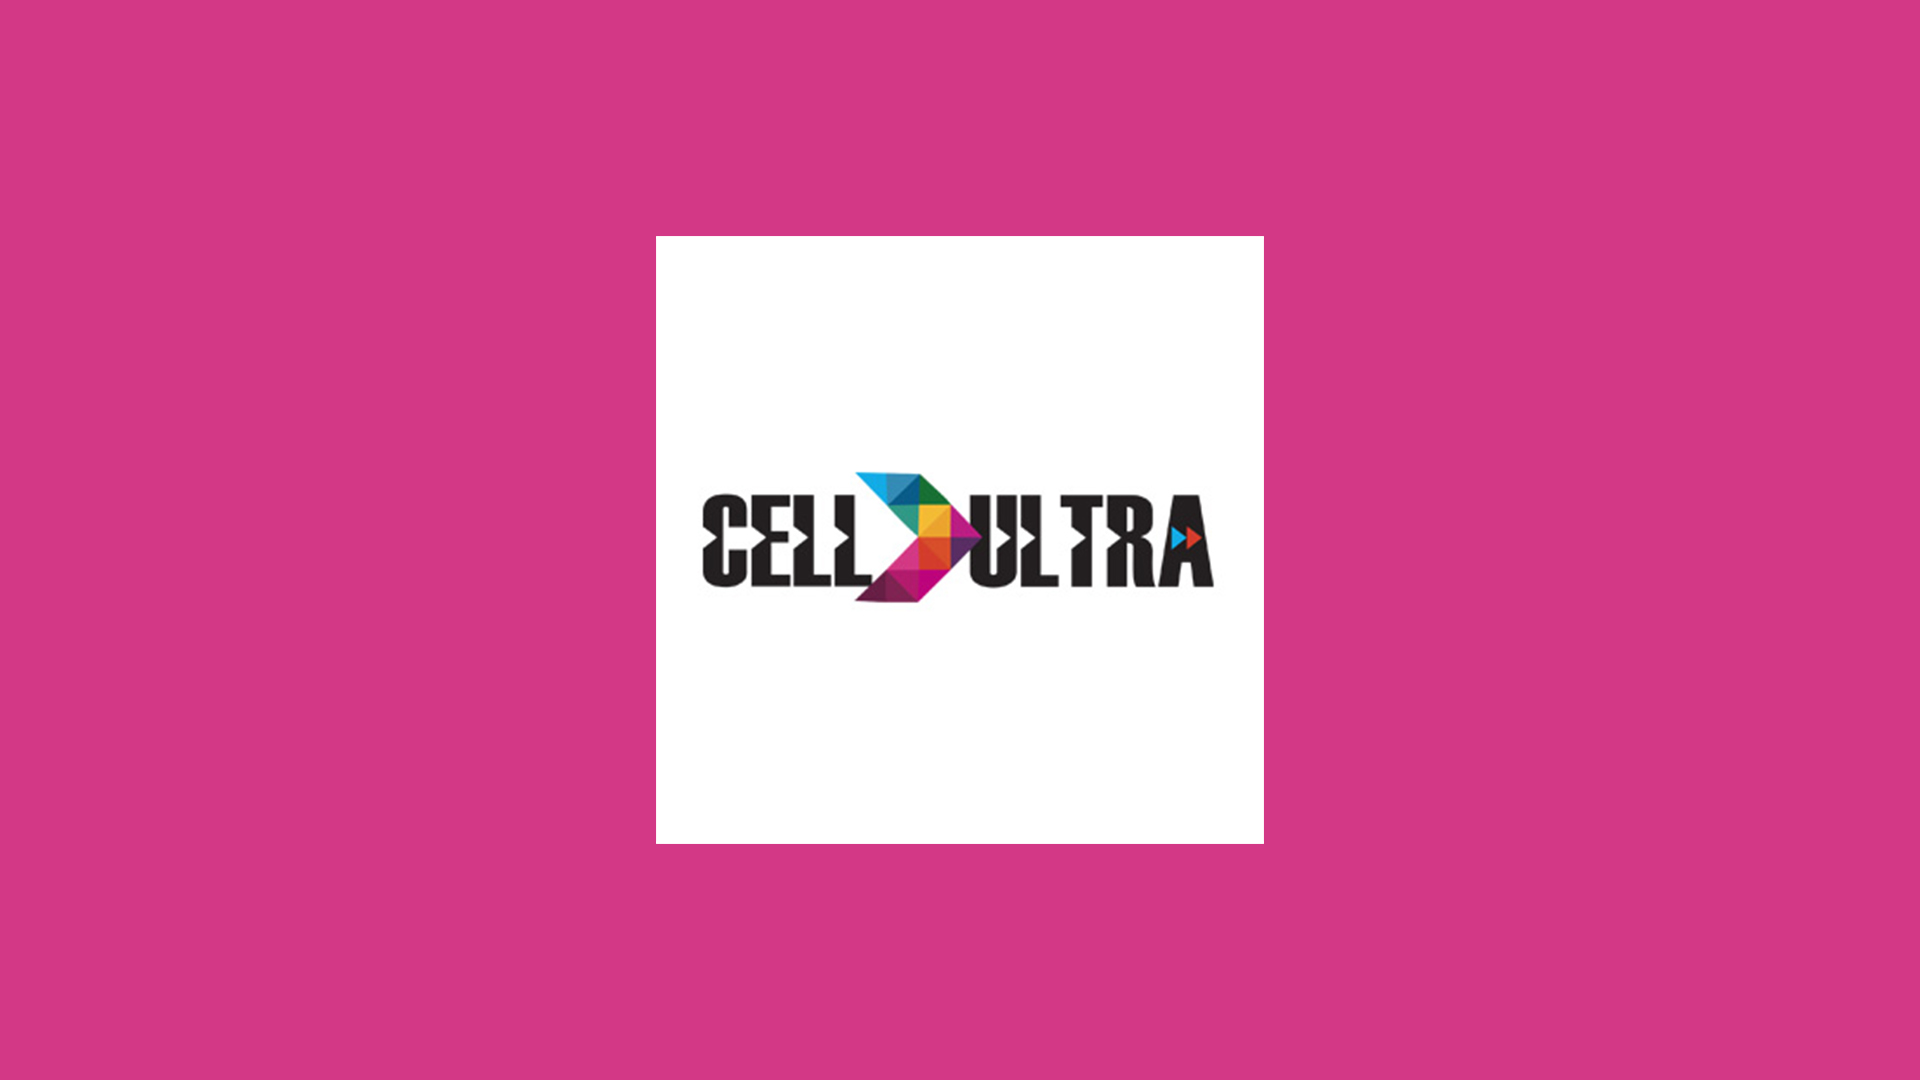 Logo Design of a Start-up Company - Cell Ultra - Neutraceutical and Healthcare Products 
